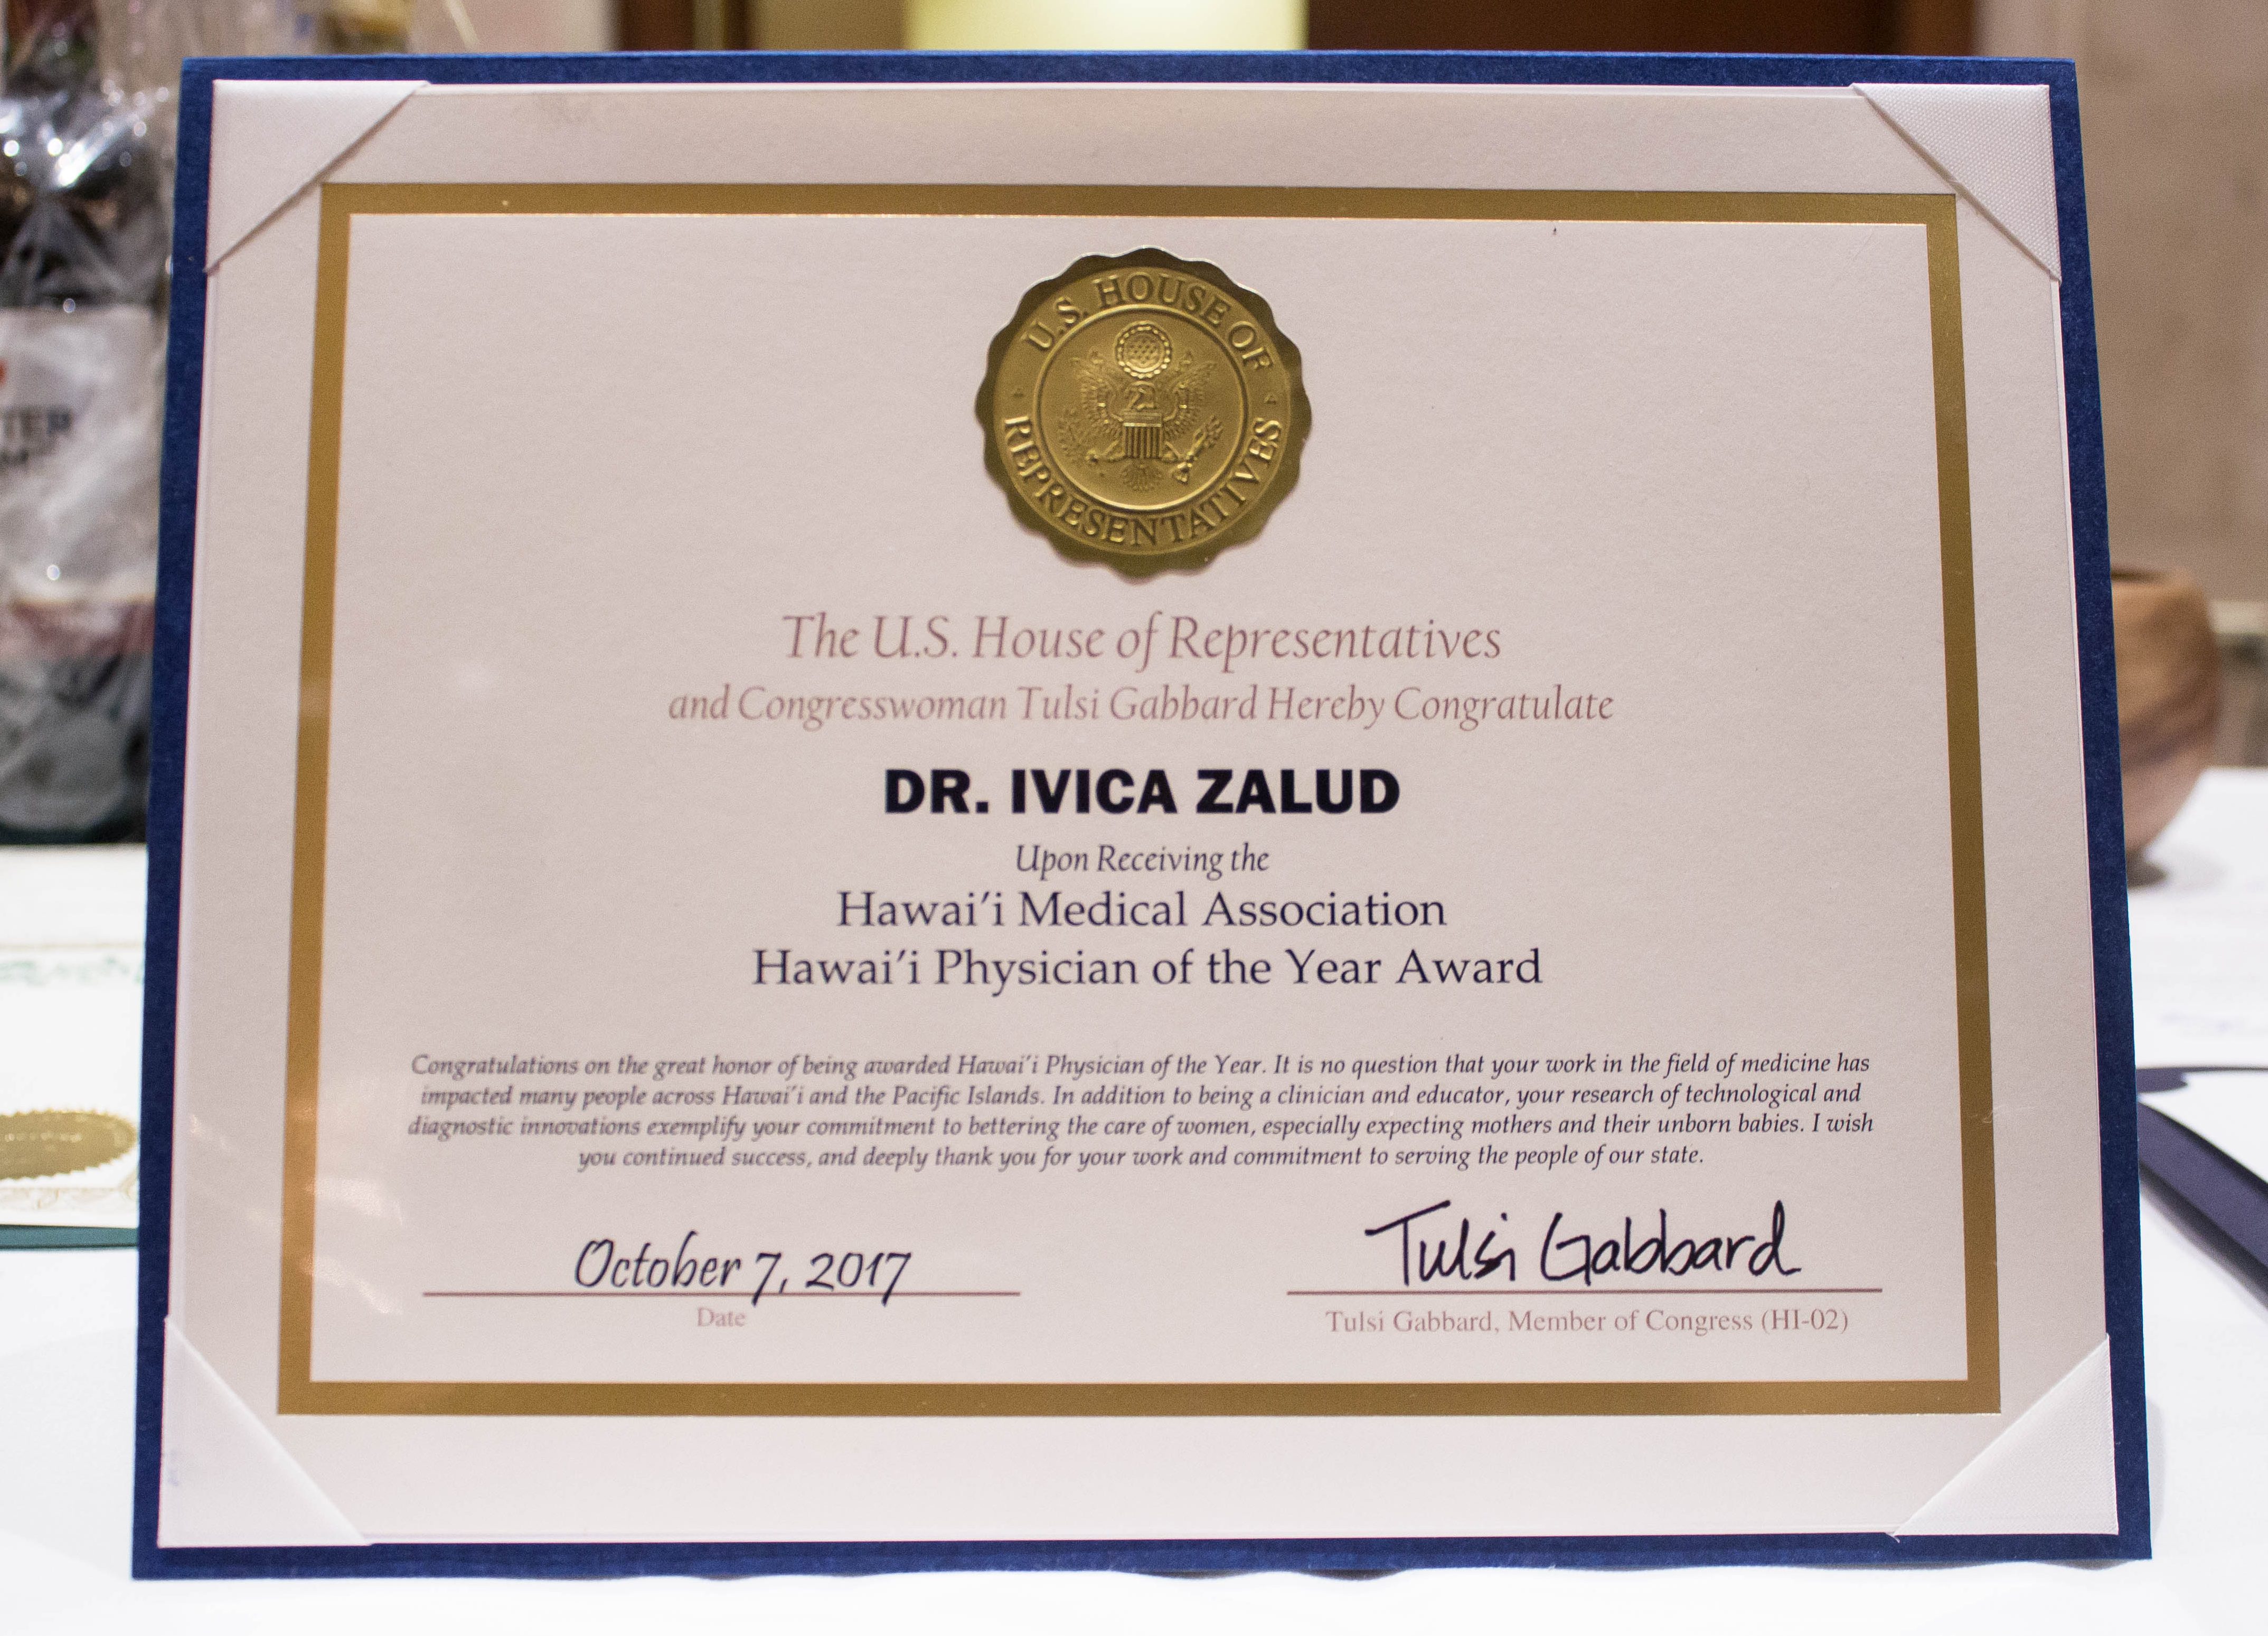 Congratulations to Dr. Ivica Zalud from the US House of Representatives and Congresswoman Tulsi Gabbard. Photo taken by Vina Cristobal.